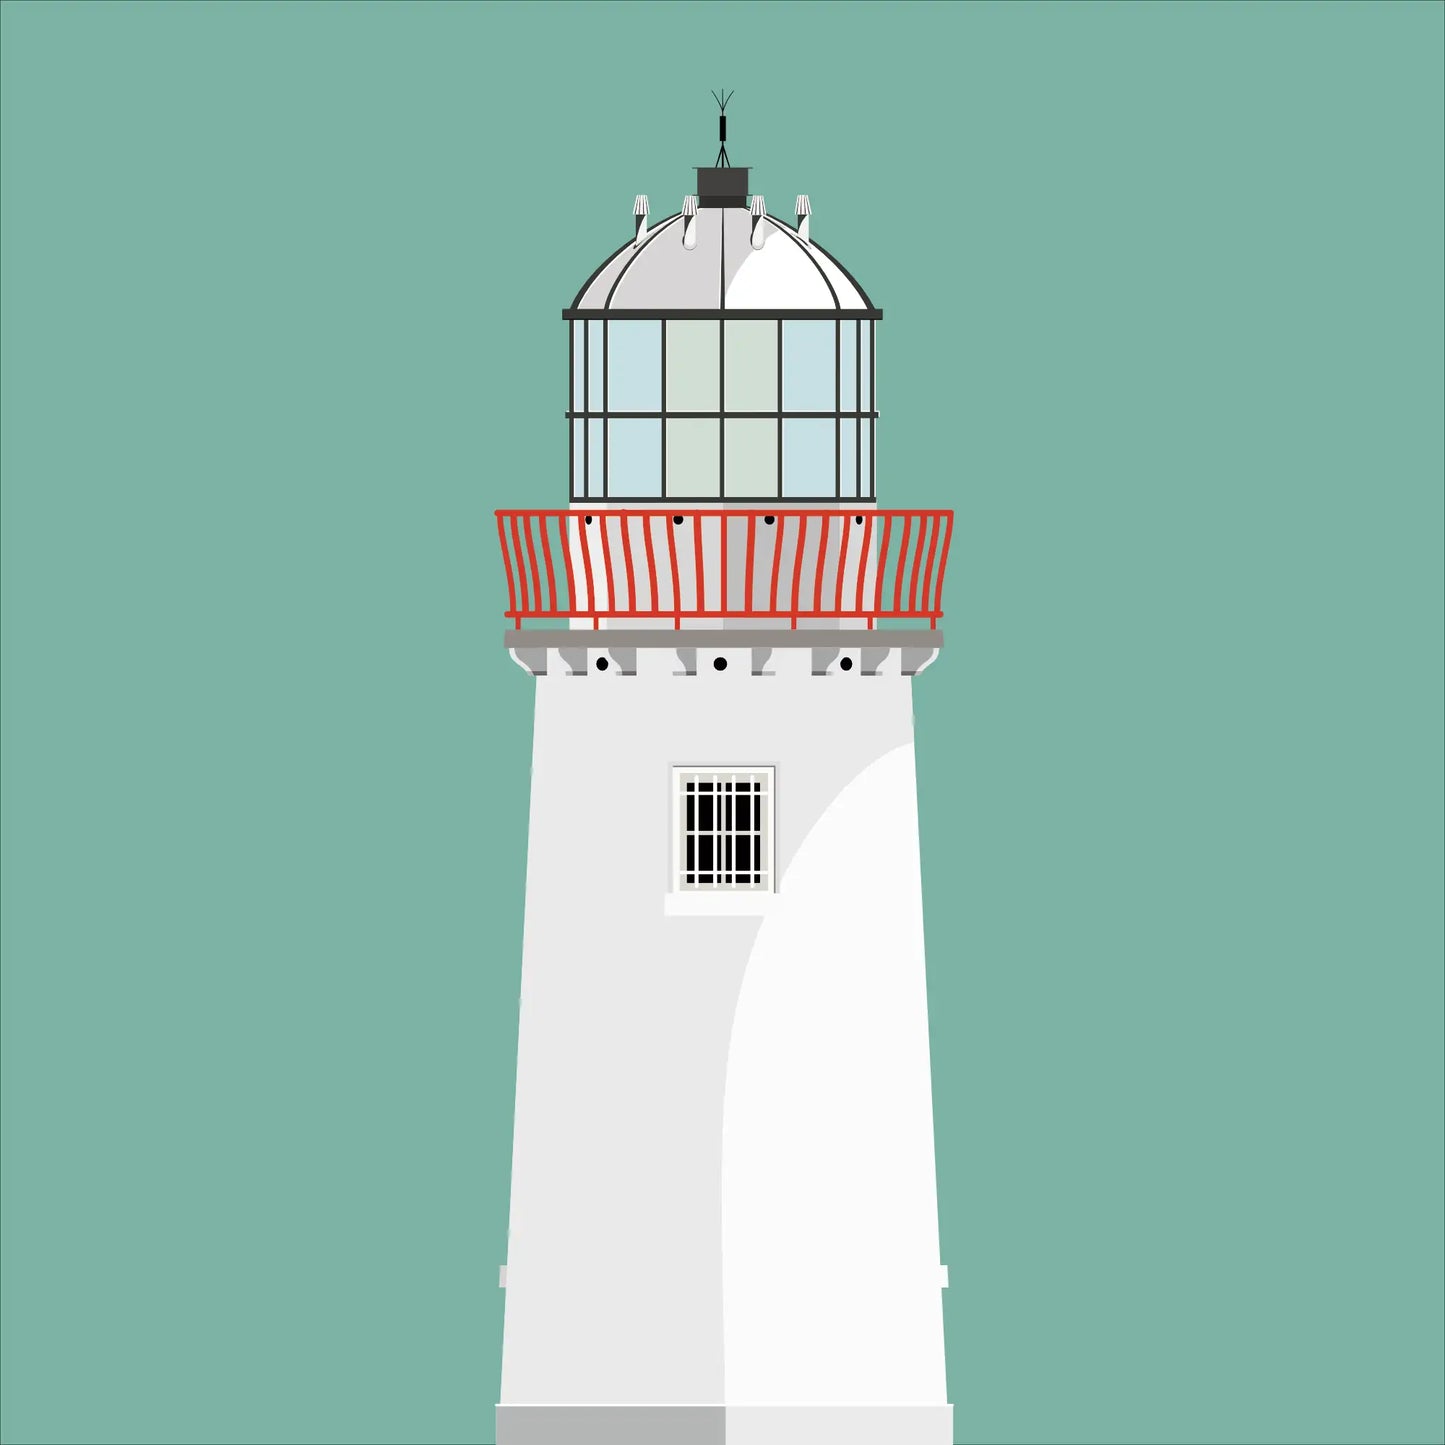 Illustration of Mutton Island lighthouse on a white background inside light blue square.